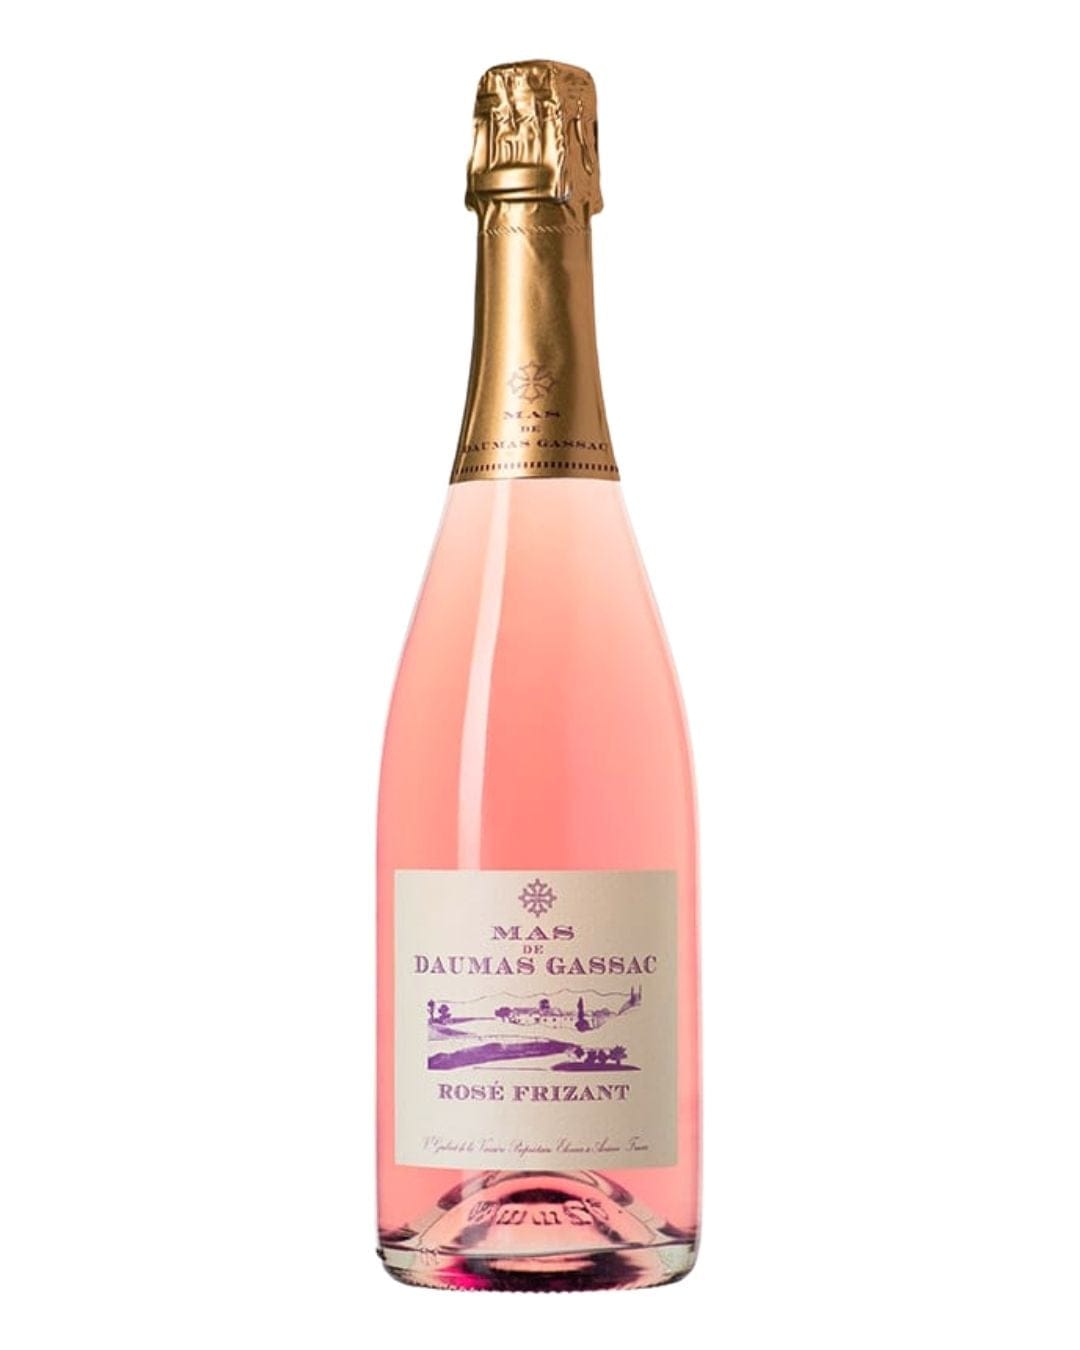 Shop Mas de Daumas Gassac Mas de Daumas Gassac Rose Frizant 2019 online at PENTICTON artisanal French wine store in Hong Kong. Discover other French wines, promotions, workshops and featured offers at pentictonpacific.com 